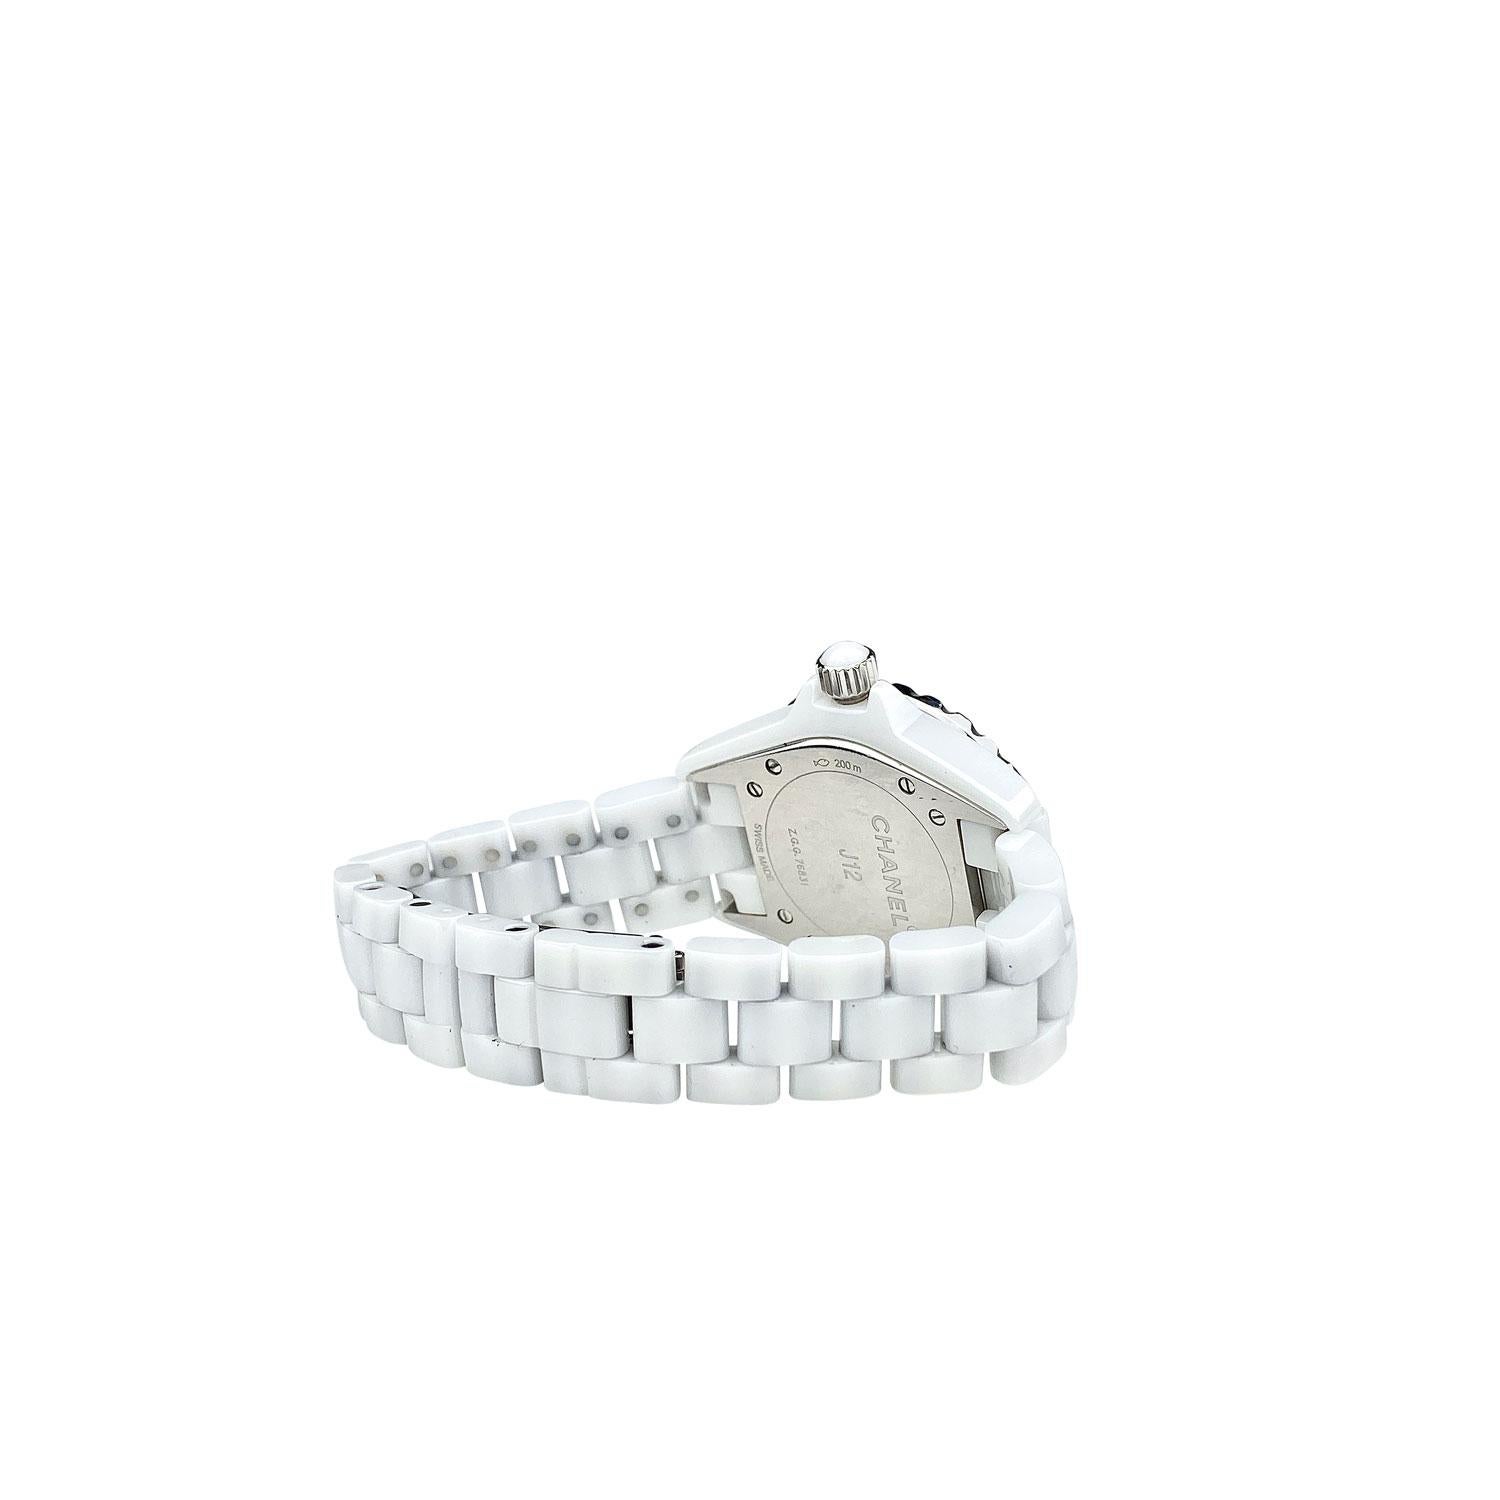 Chanel Ceramic White J 12 Watch  In Excellent Condition For Sale In Sundbyberg, SE